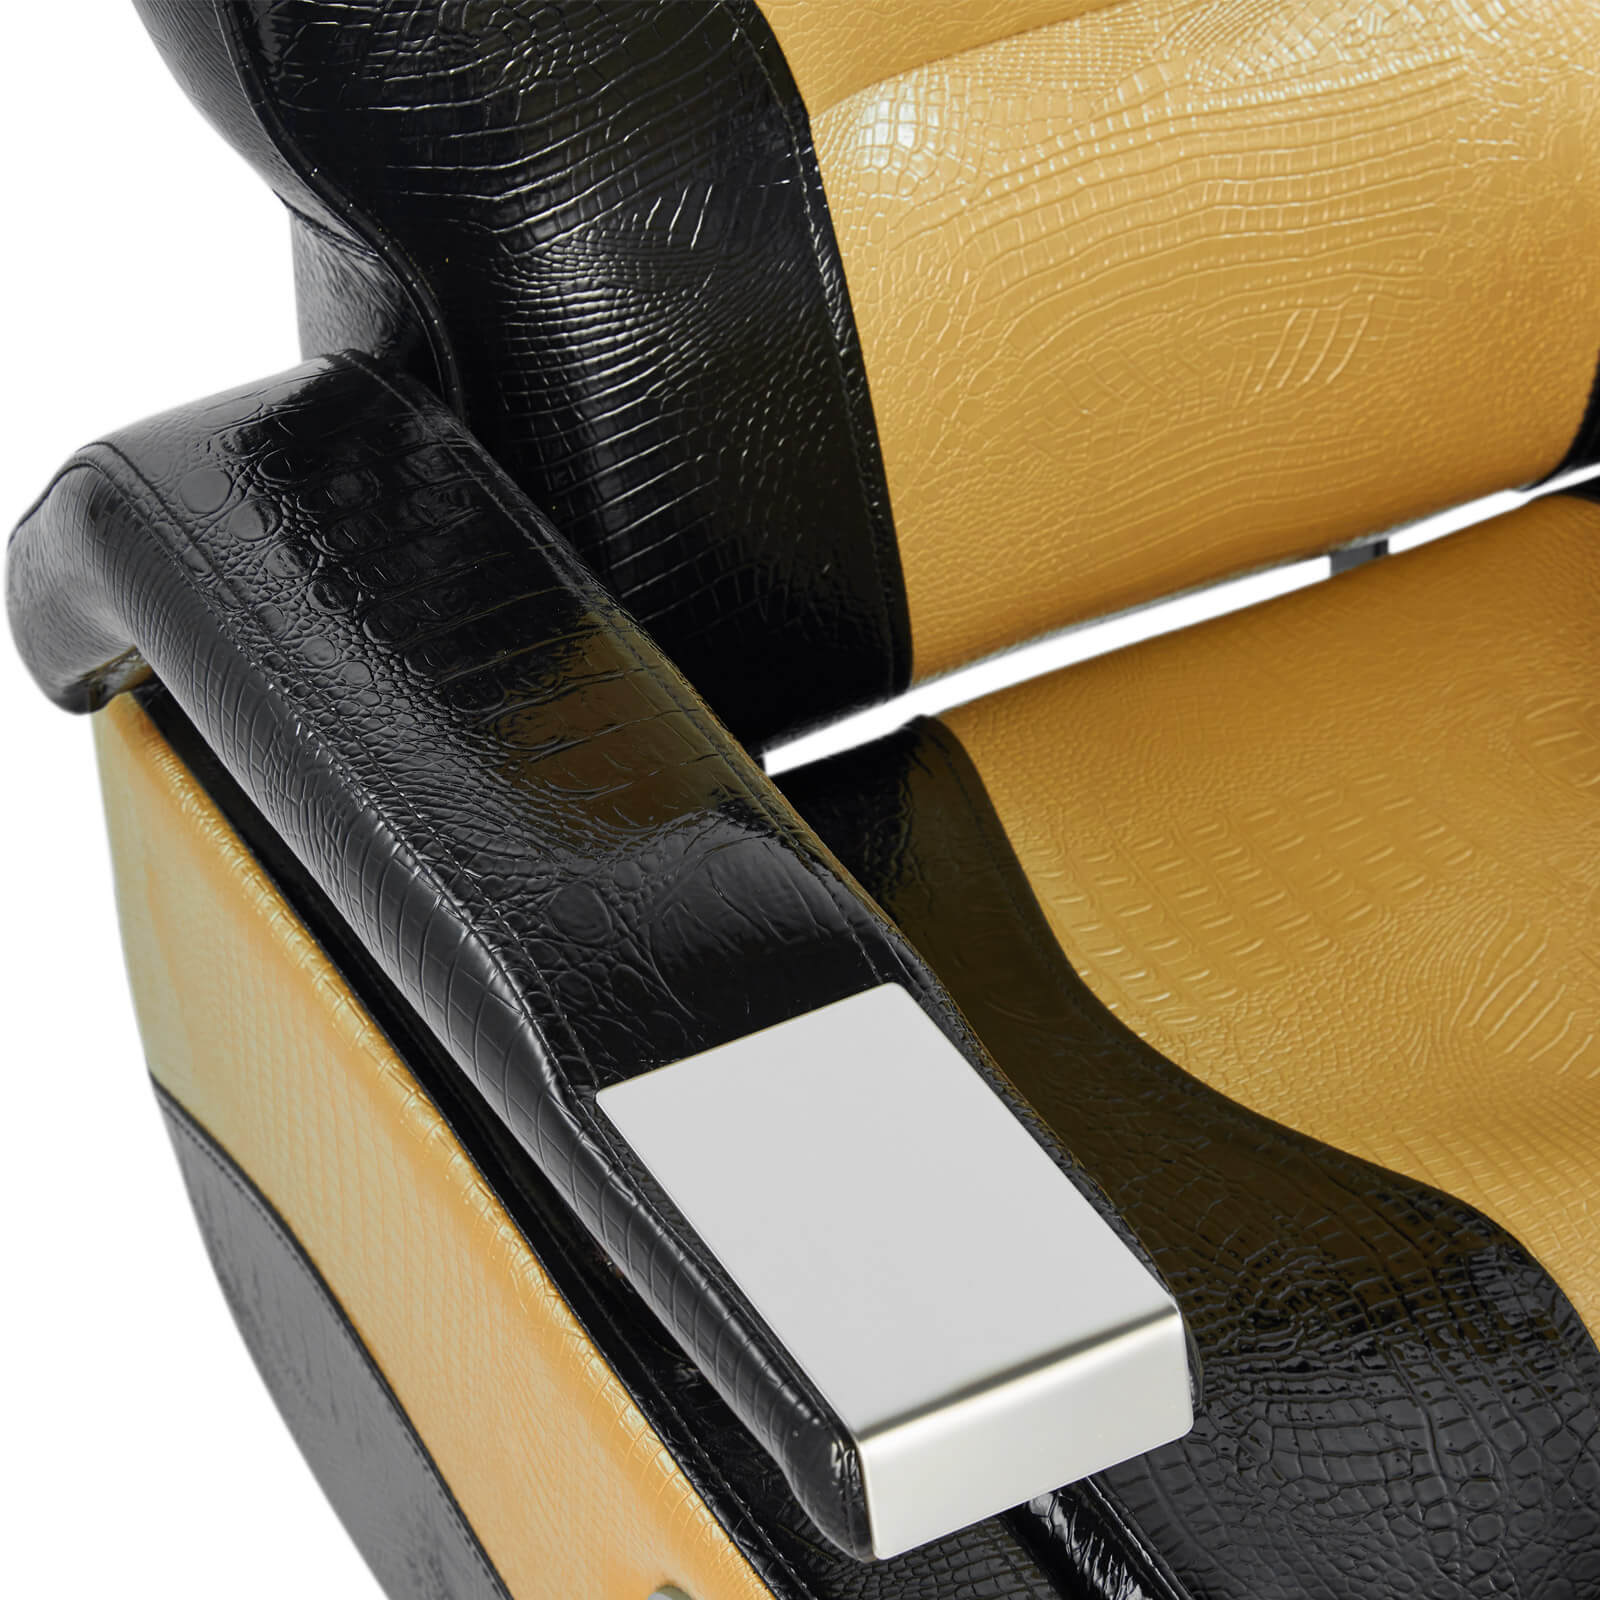 Electric Recline Heavy Duty Barber Chair